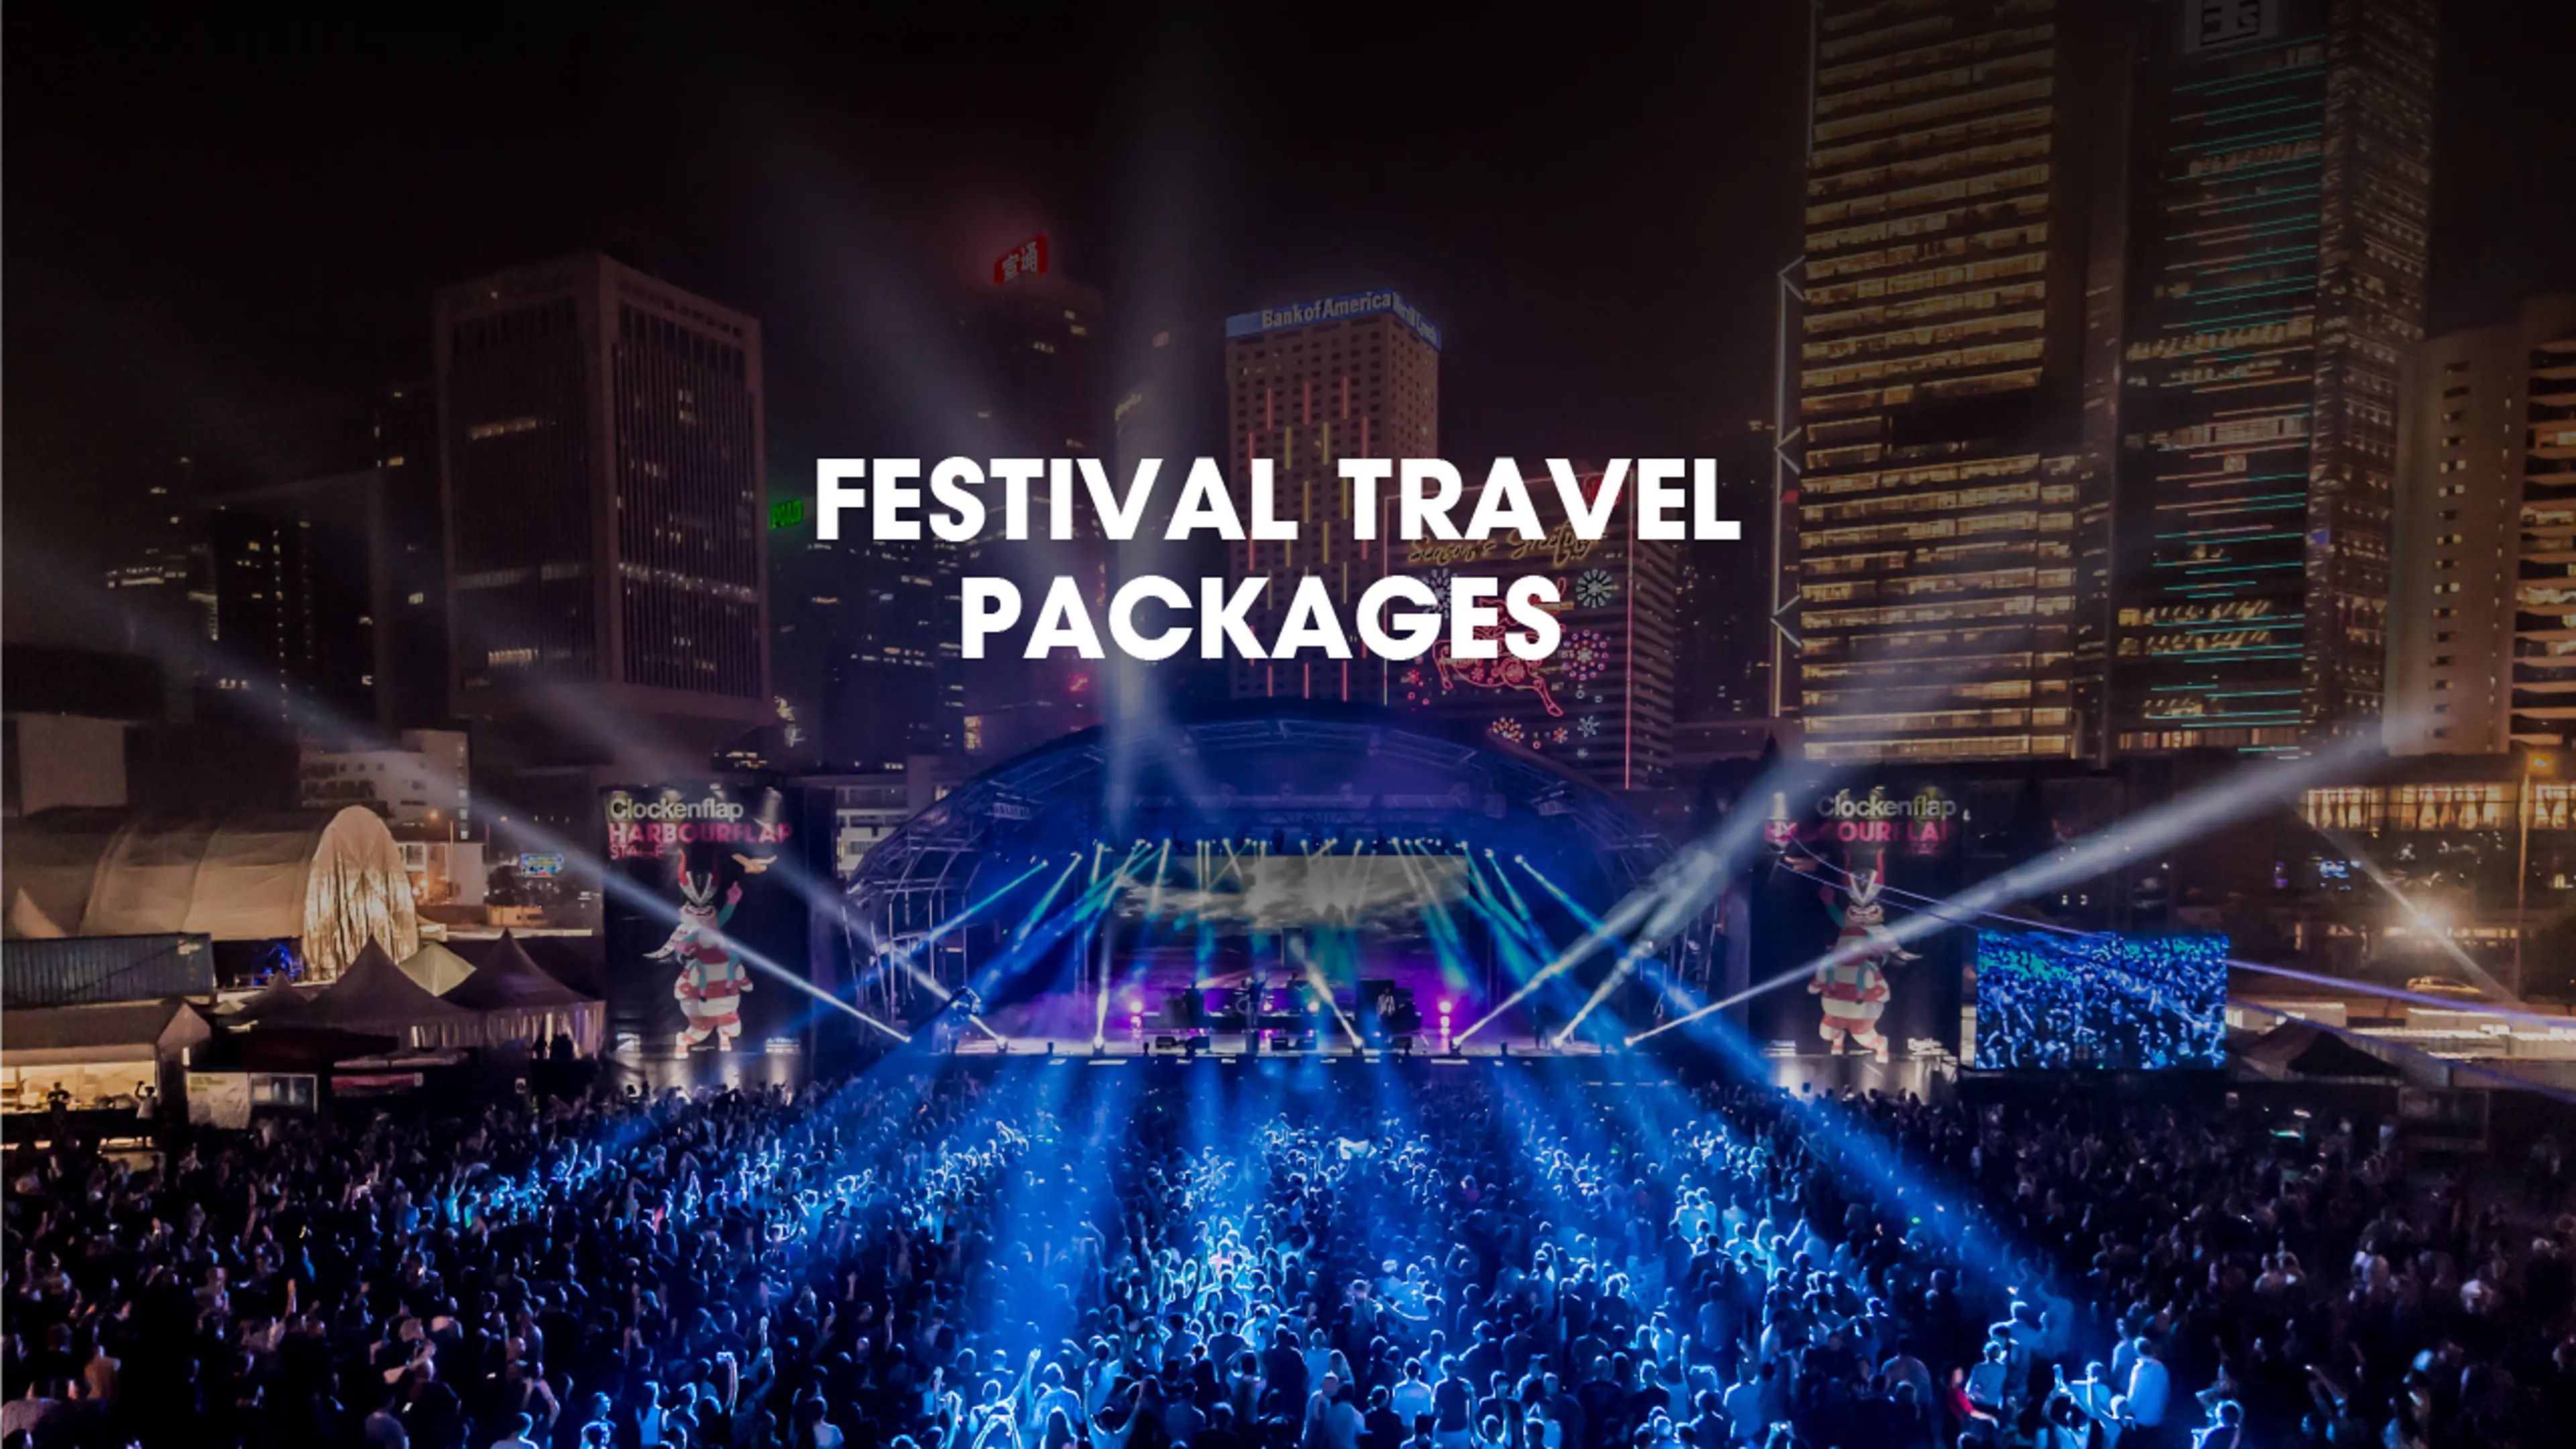 Festival Travel Packages